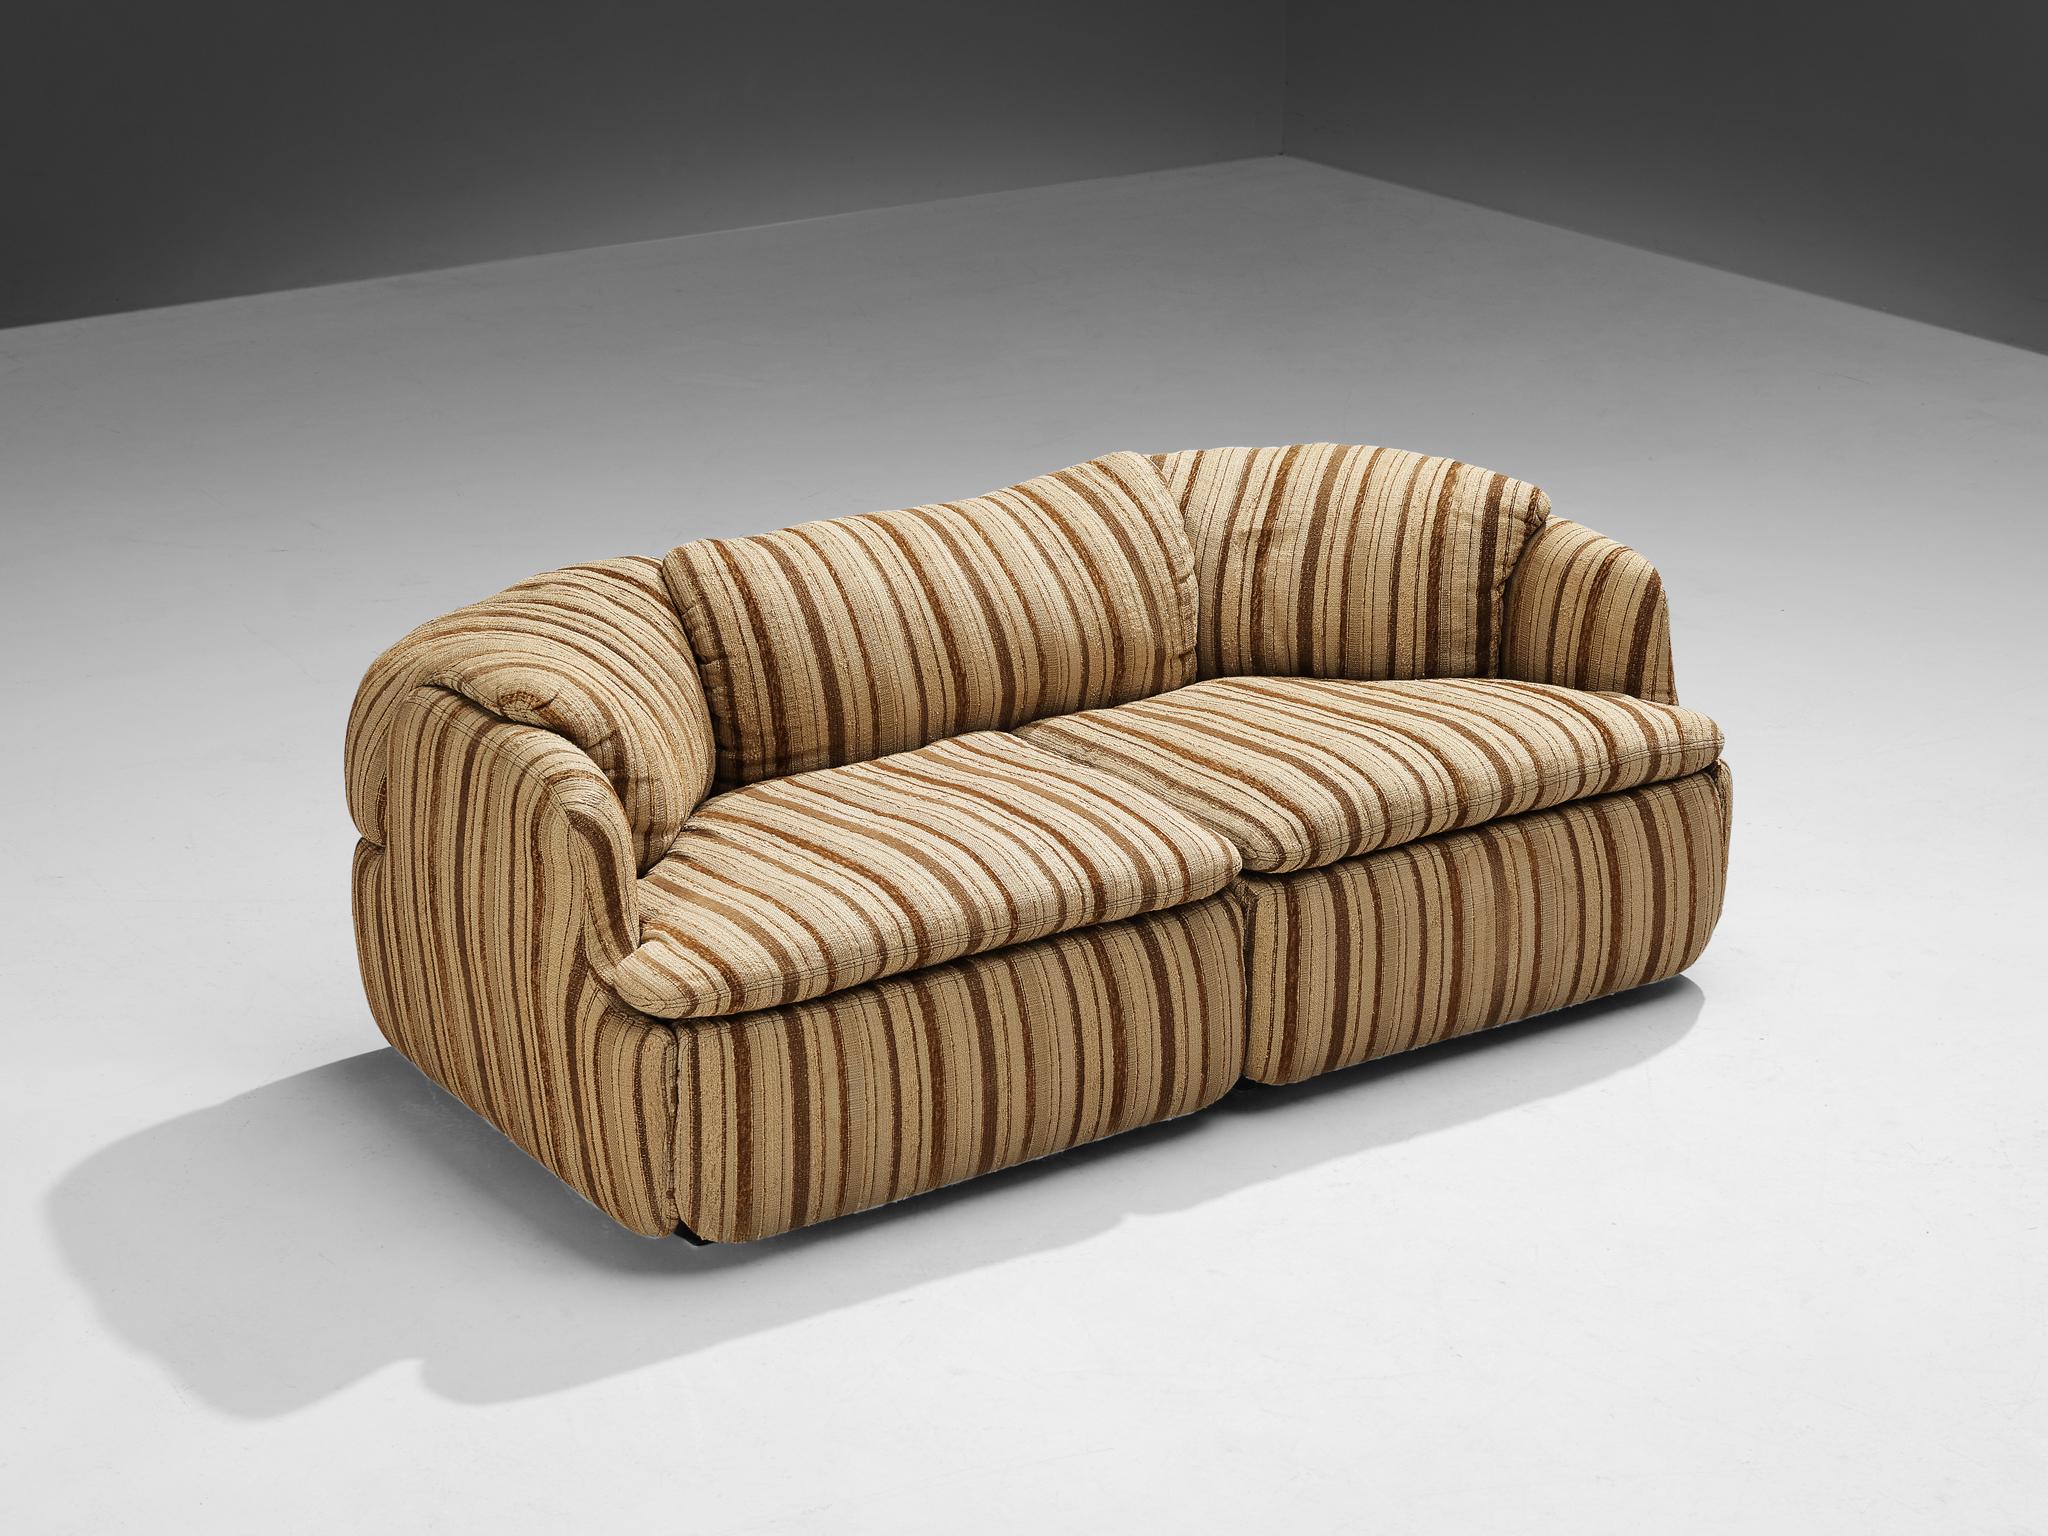 Alberto Rosselli for Saporiti, sectional sofa, model 'Confidential', fabric, Italy, design 1972

Sofa designed by Italian architect and furniture designer Alberto Rosselli in 1972 for Saporiti Italia. The characteristic striped upholstery is